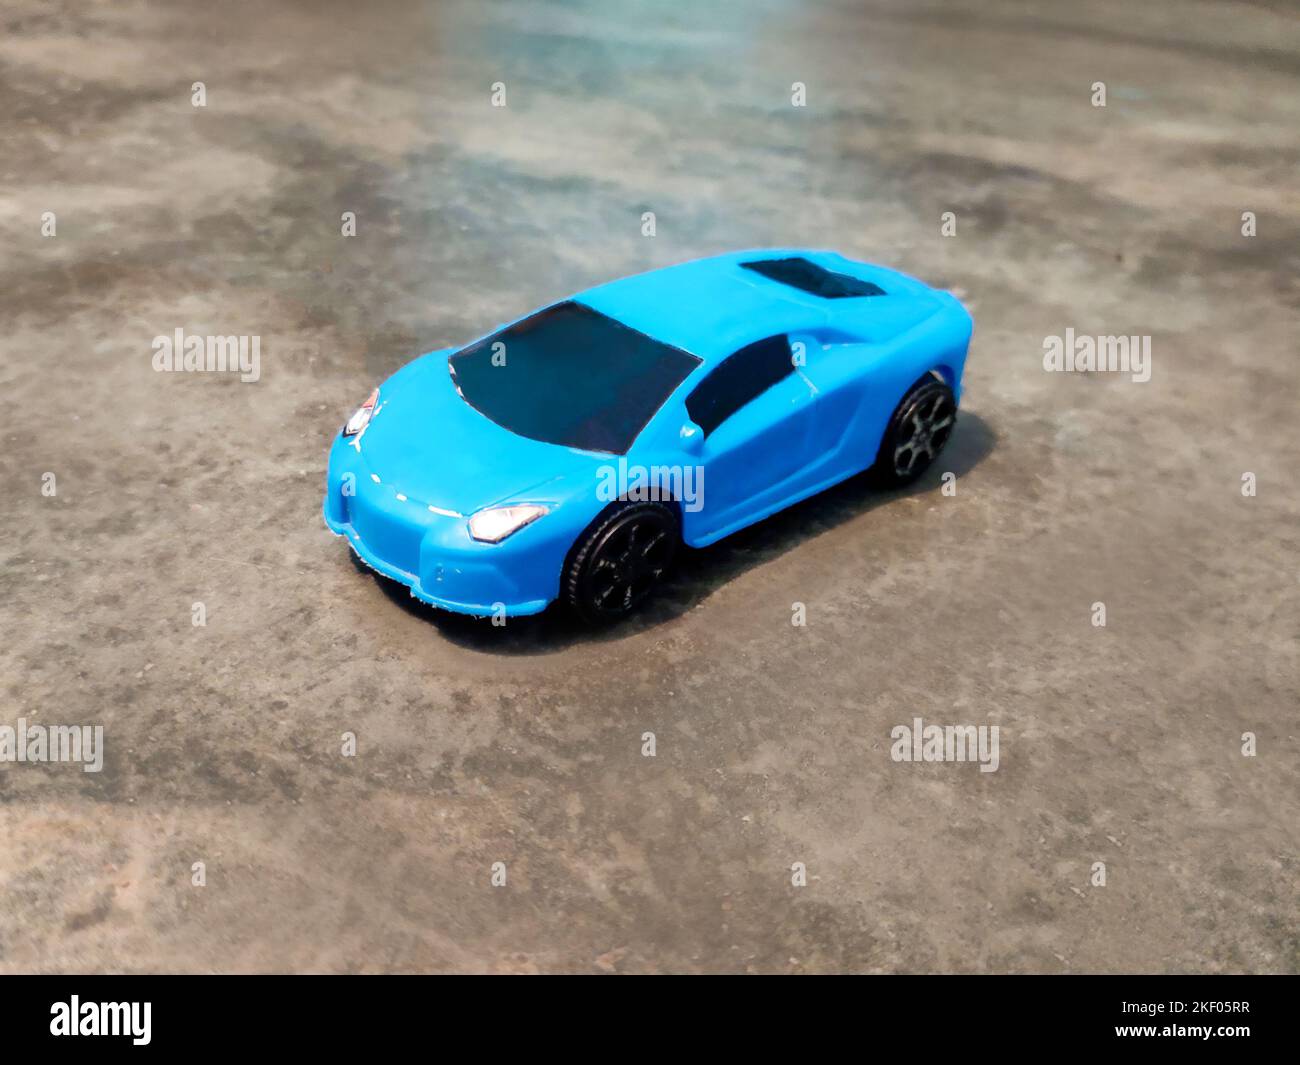 A vintage toy blue sports car resting on the ground. Stock Photo